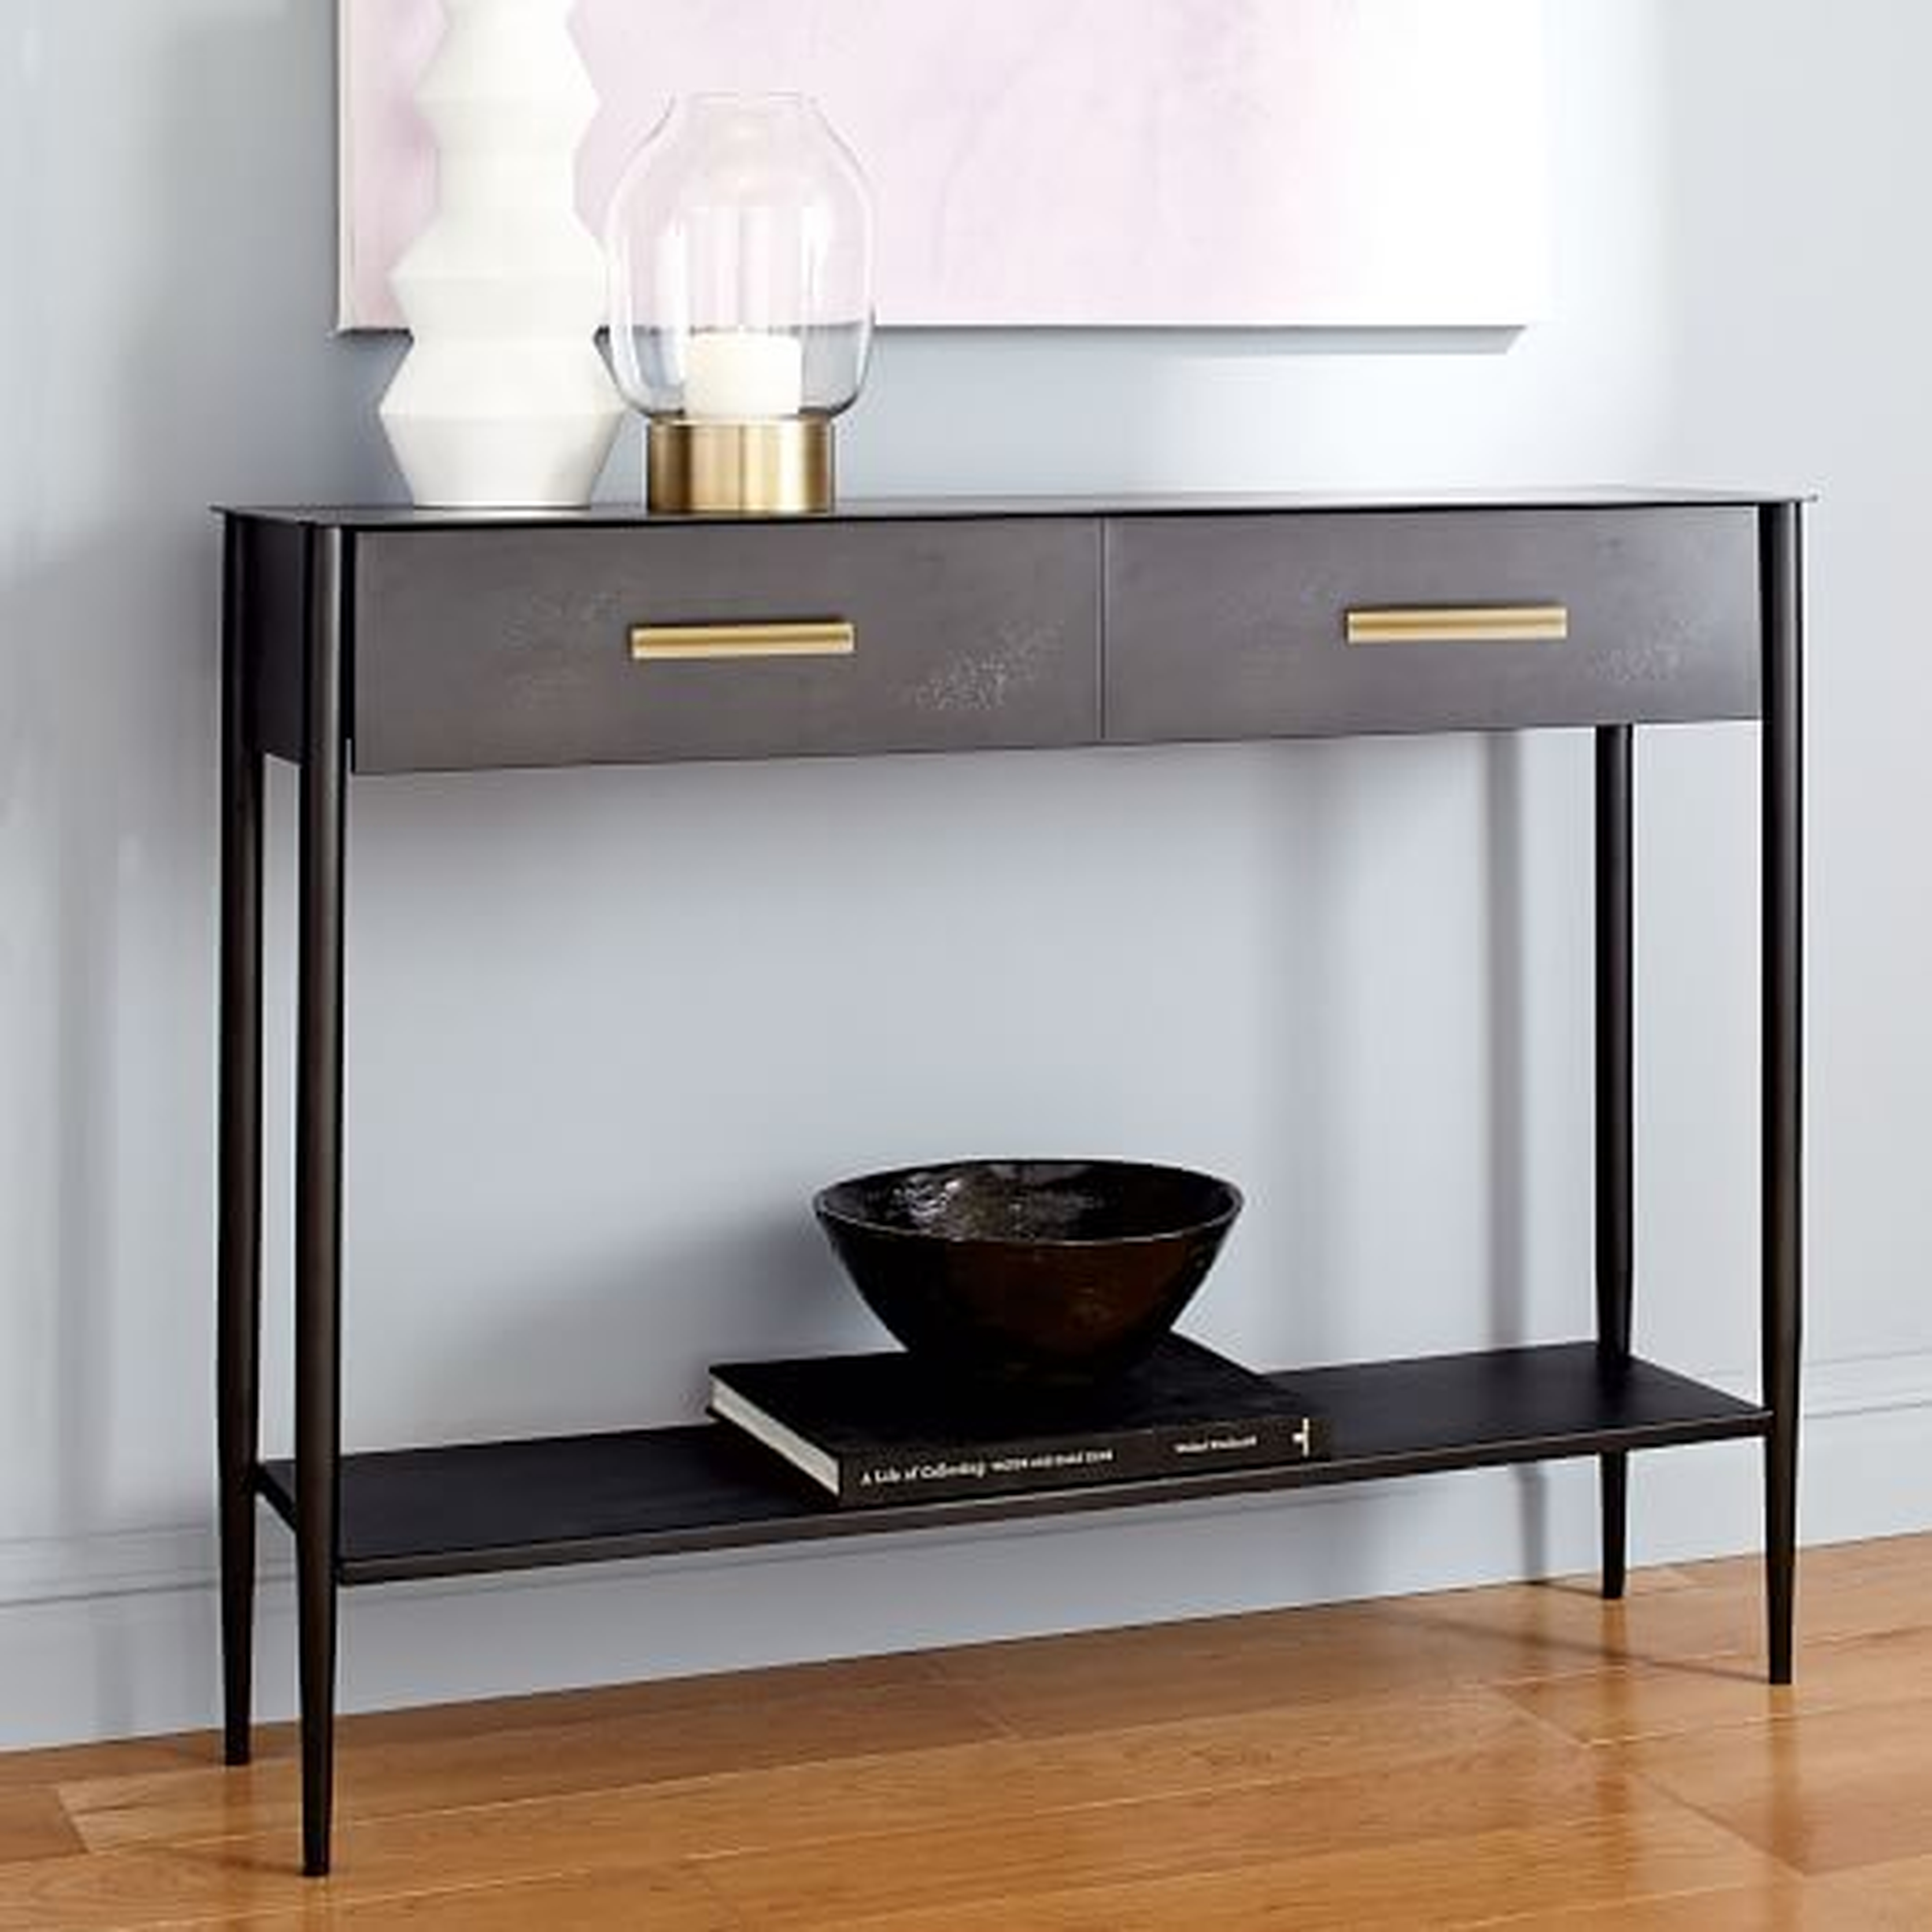 Metalwork Console - Hot-Rolled Steel Finish - West Elm